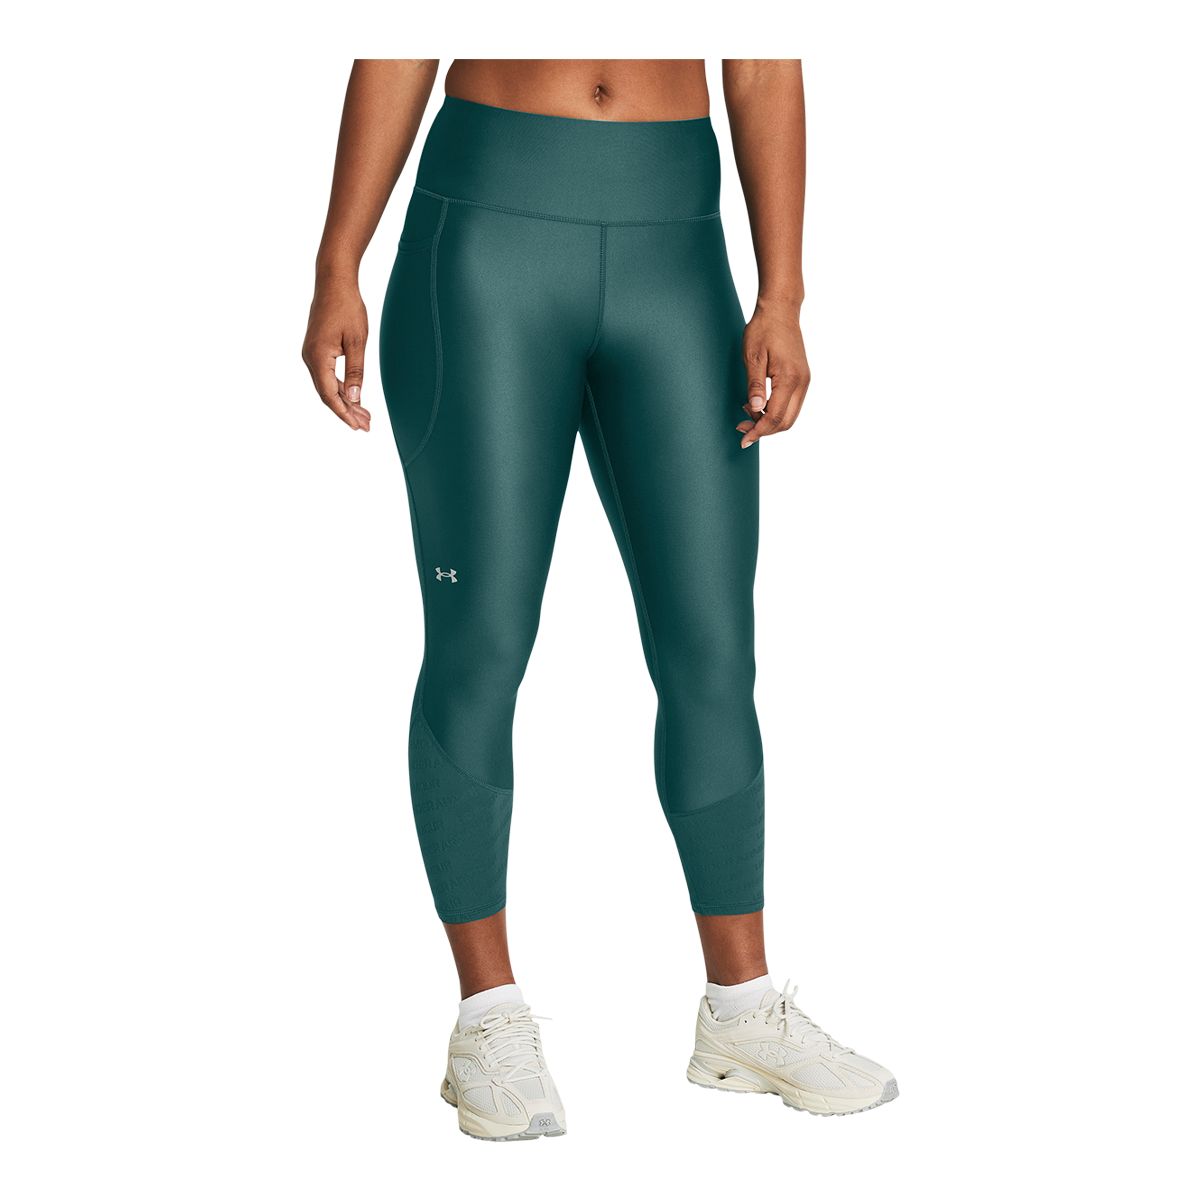 Image of Under Armour Women's Armour Breeze Ankle Tights